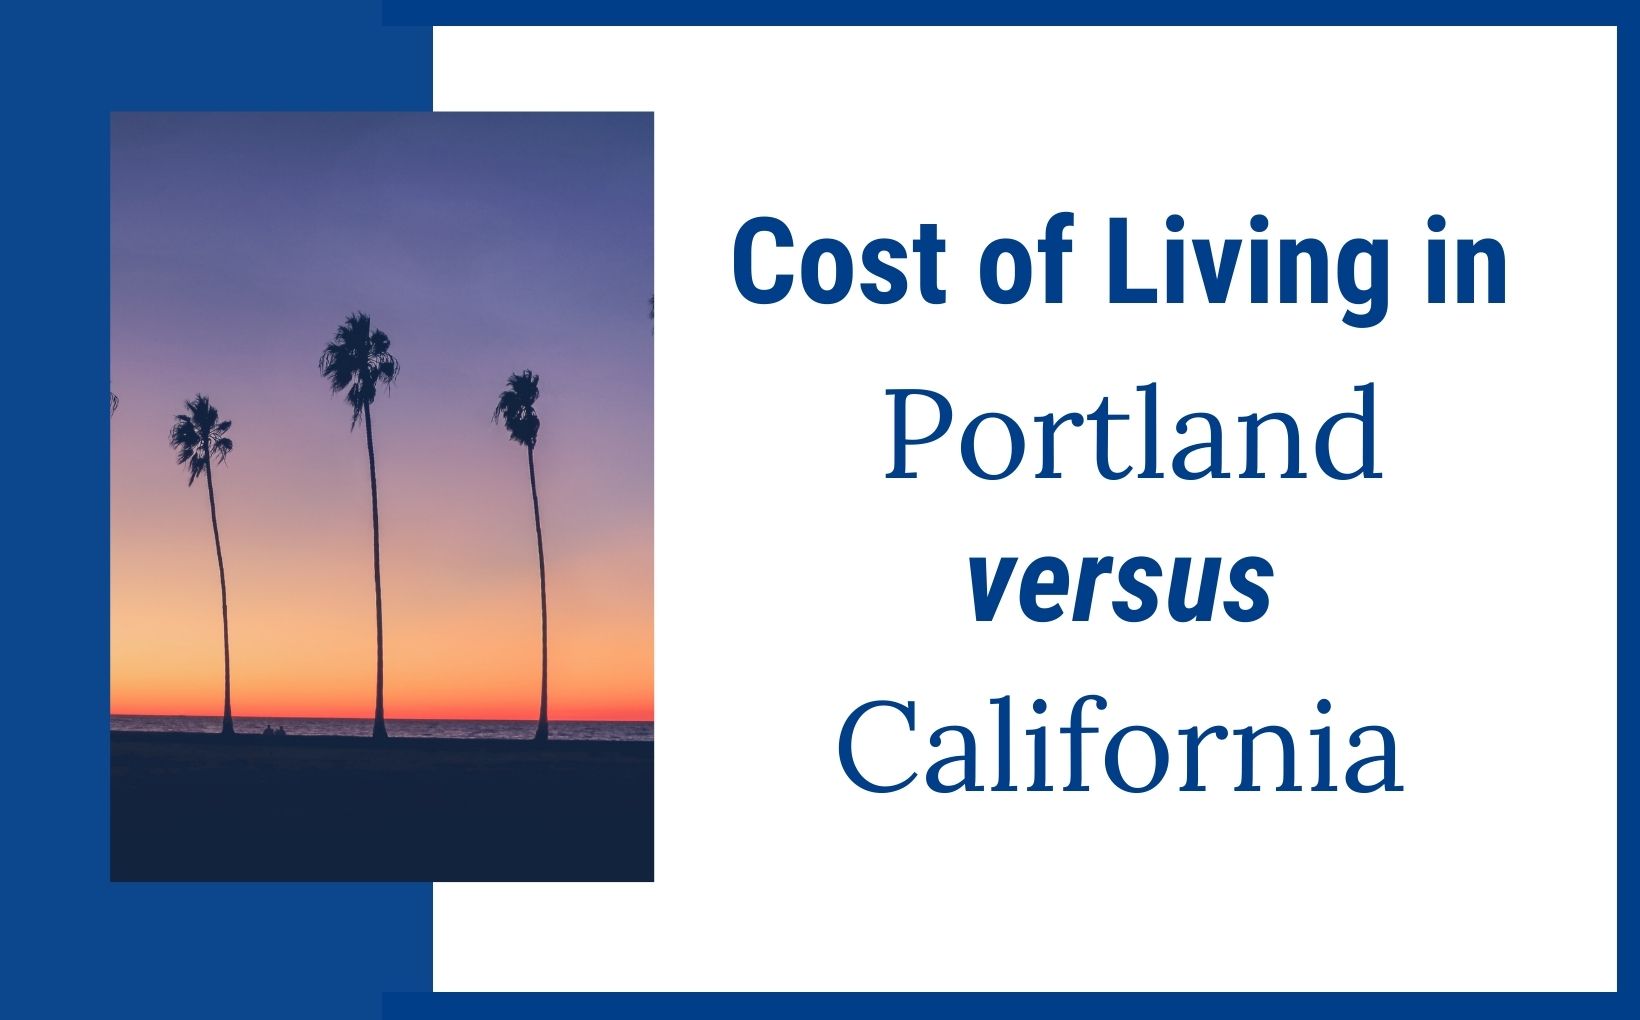 Cost of Living in Portland vs California feature image